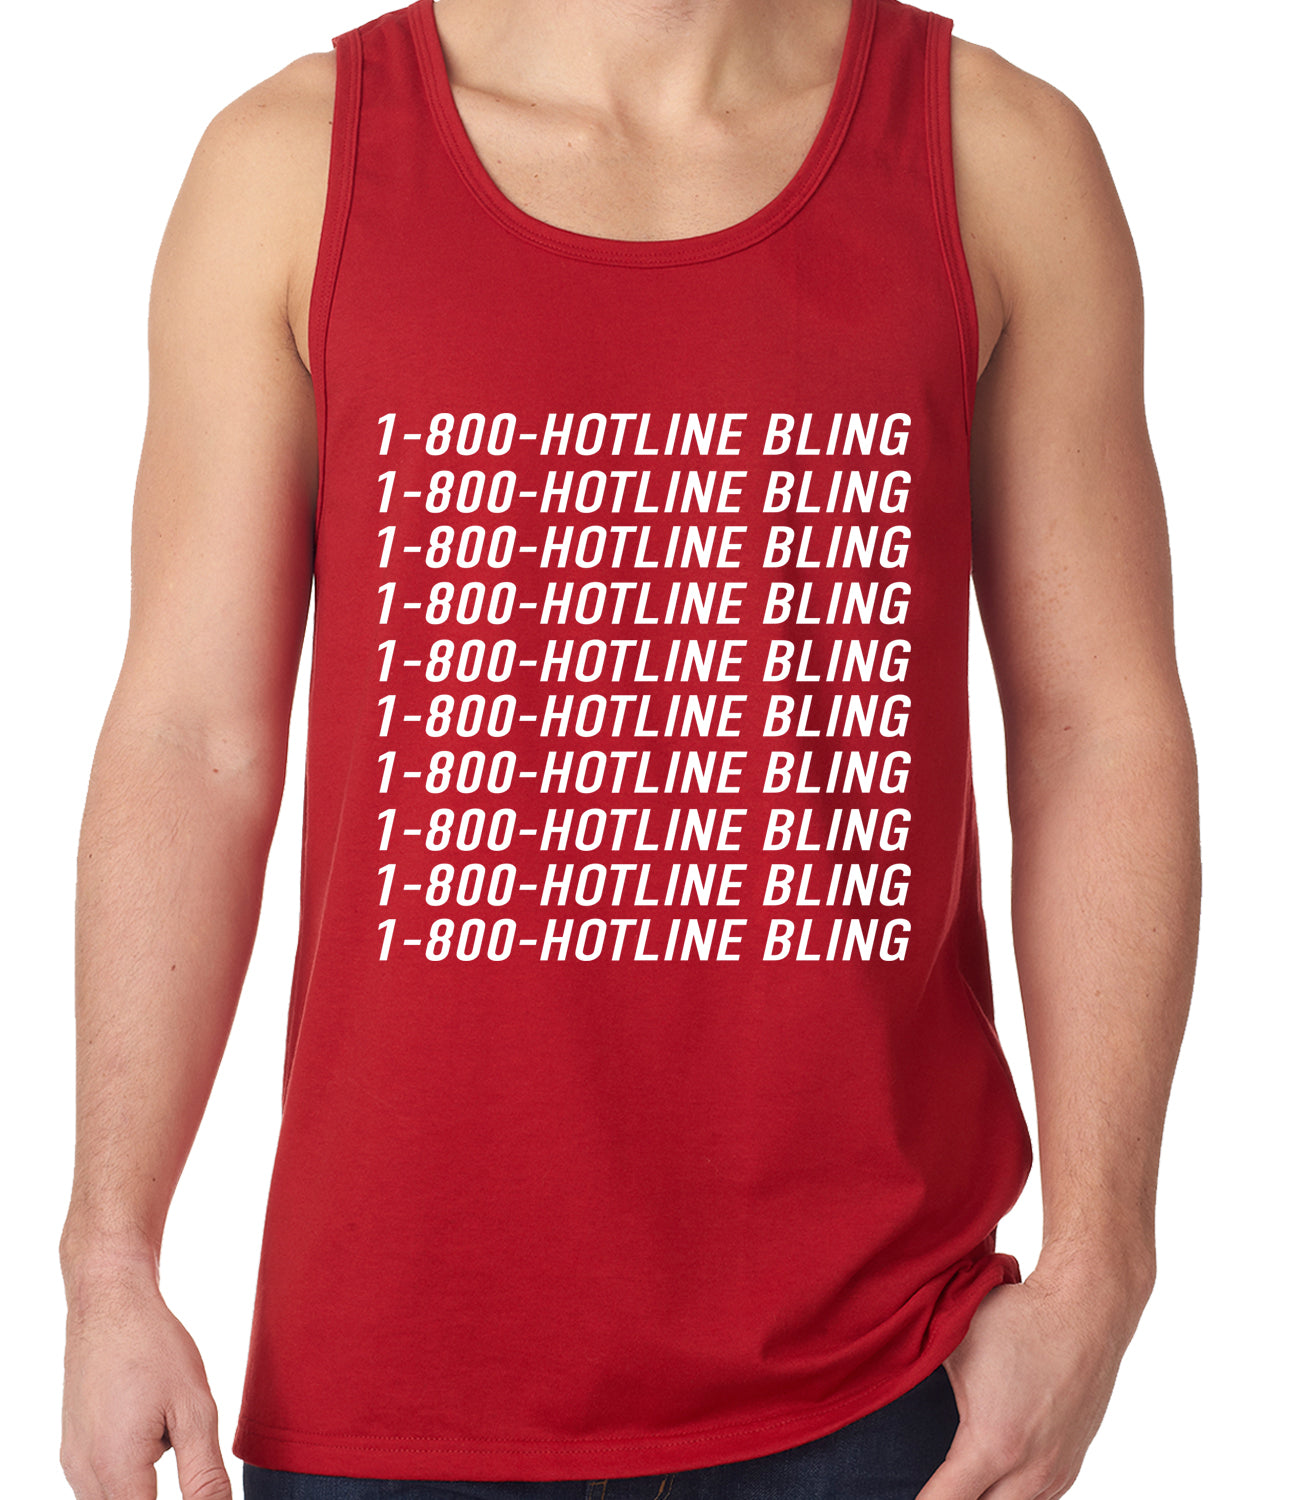 1-800-HotlineBling Tank Top Red